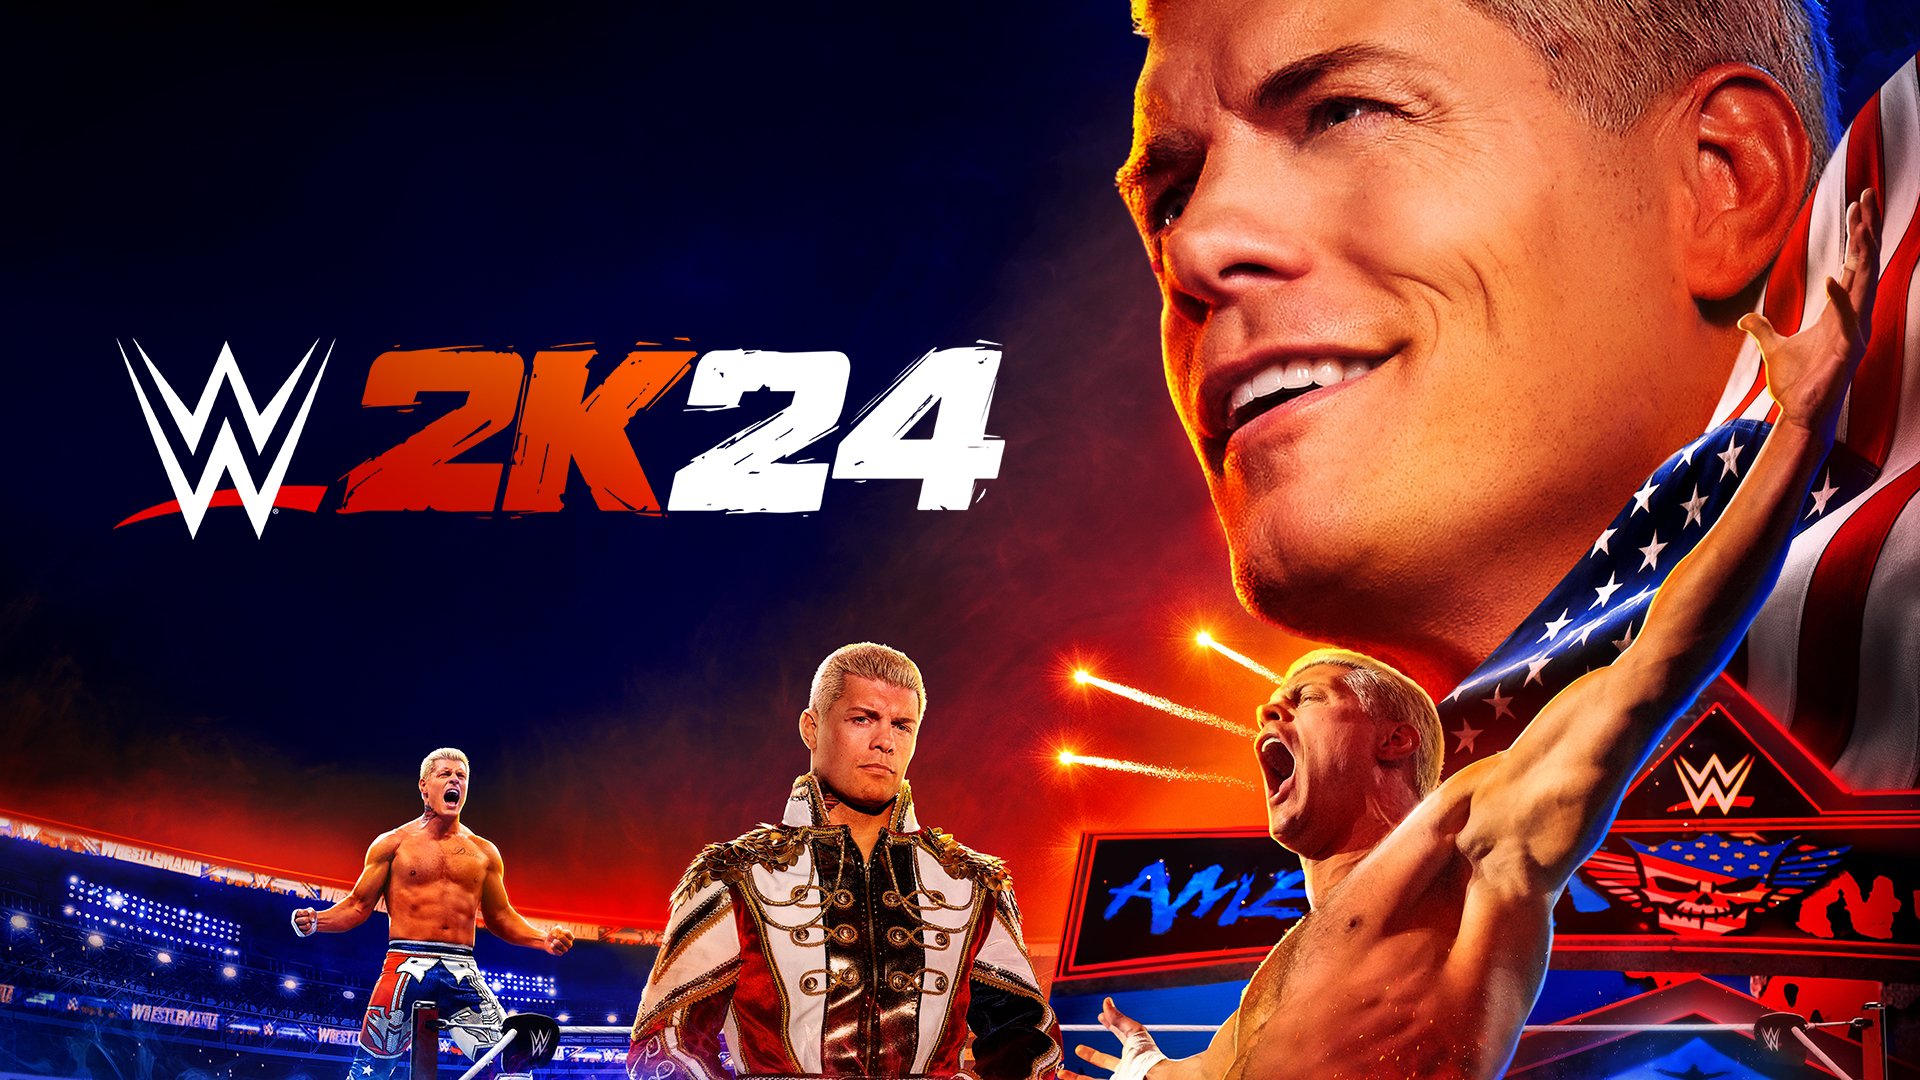 WWE 2K24 Announced! 40 Years of Wrestlemania, New Match Types, Cover Star, Trailer and more!